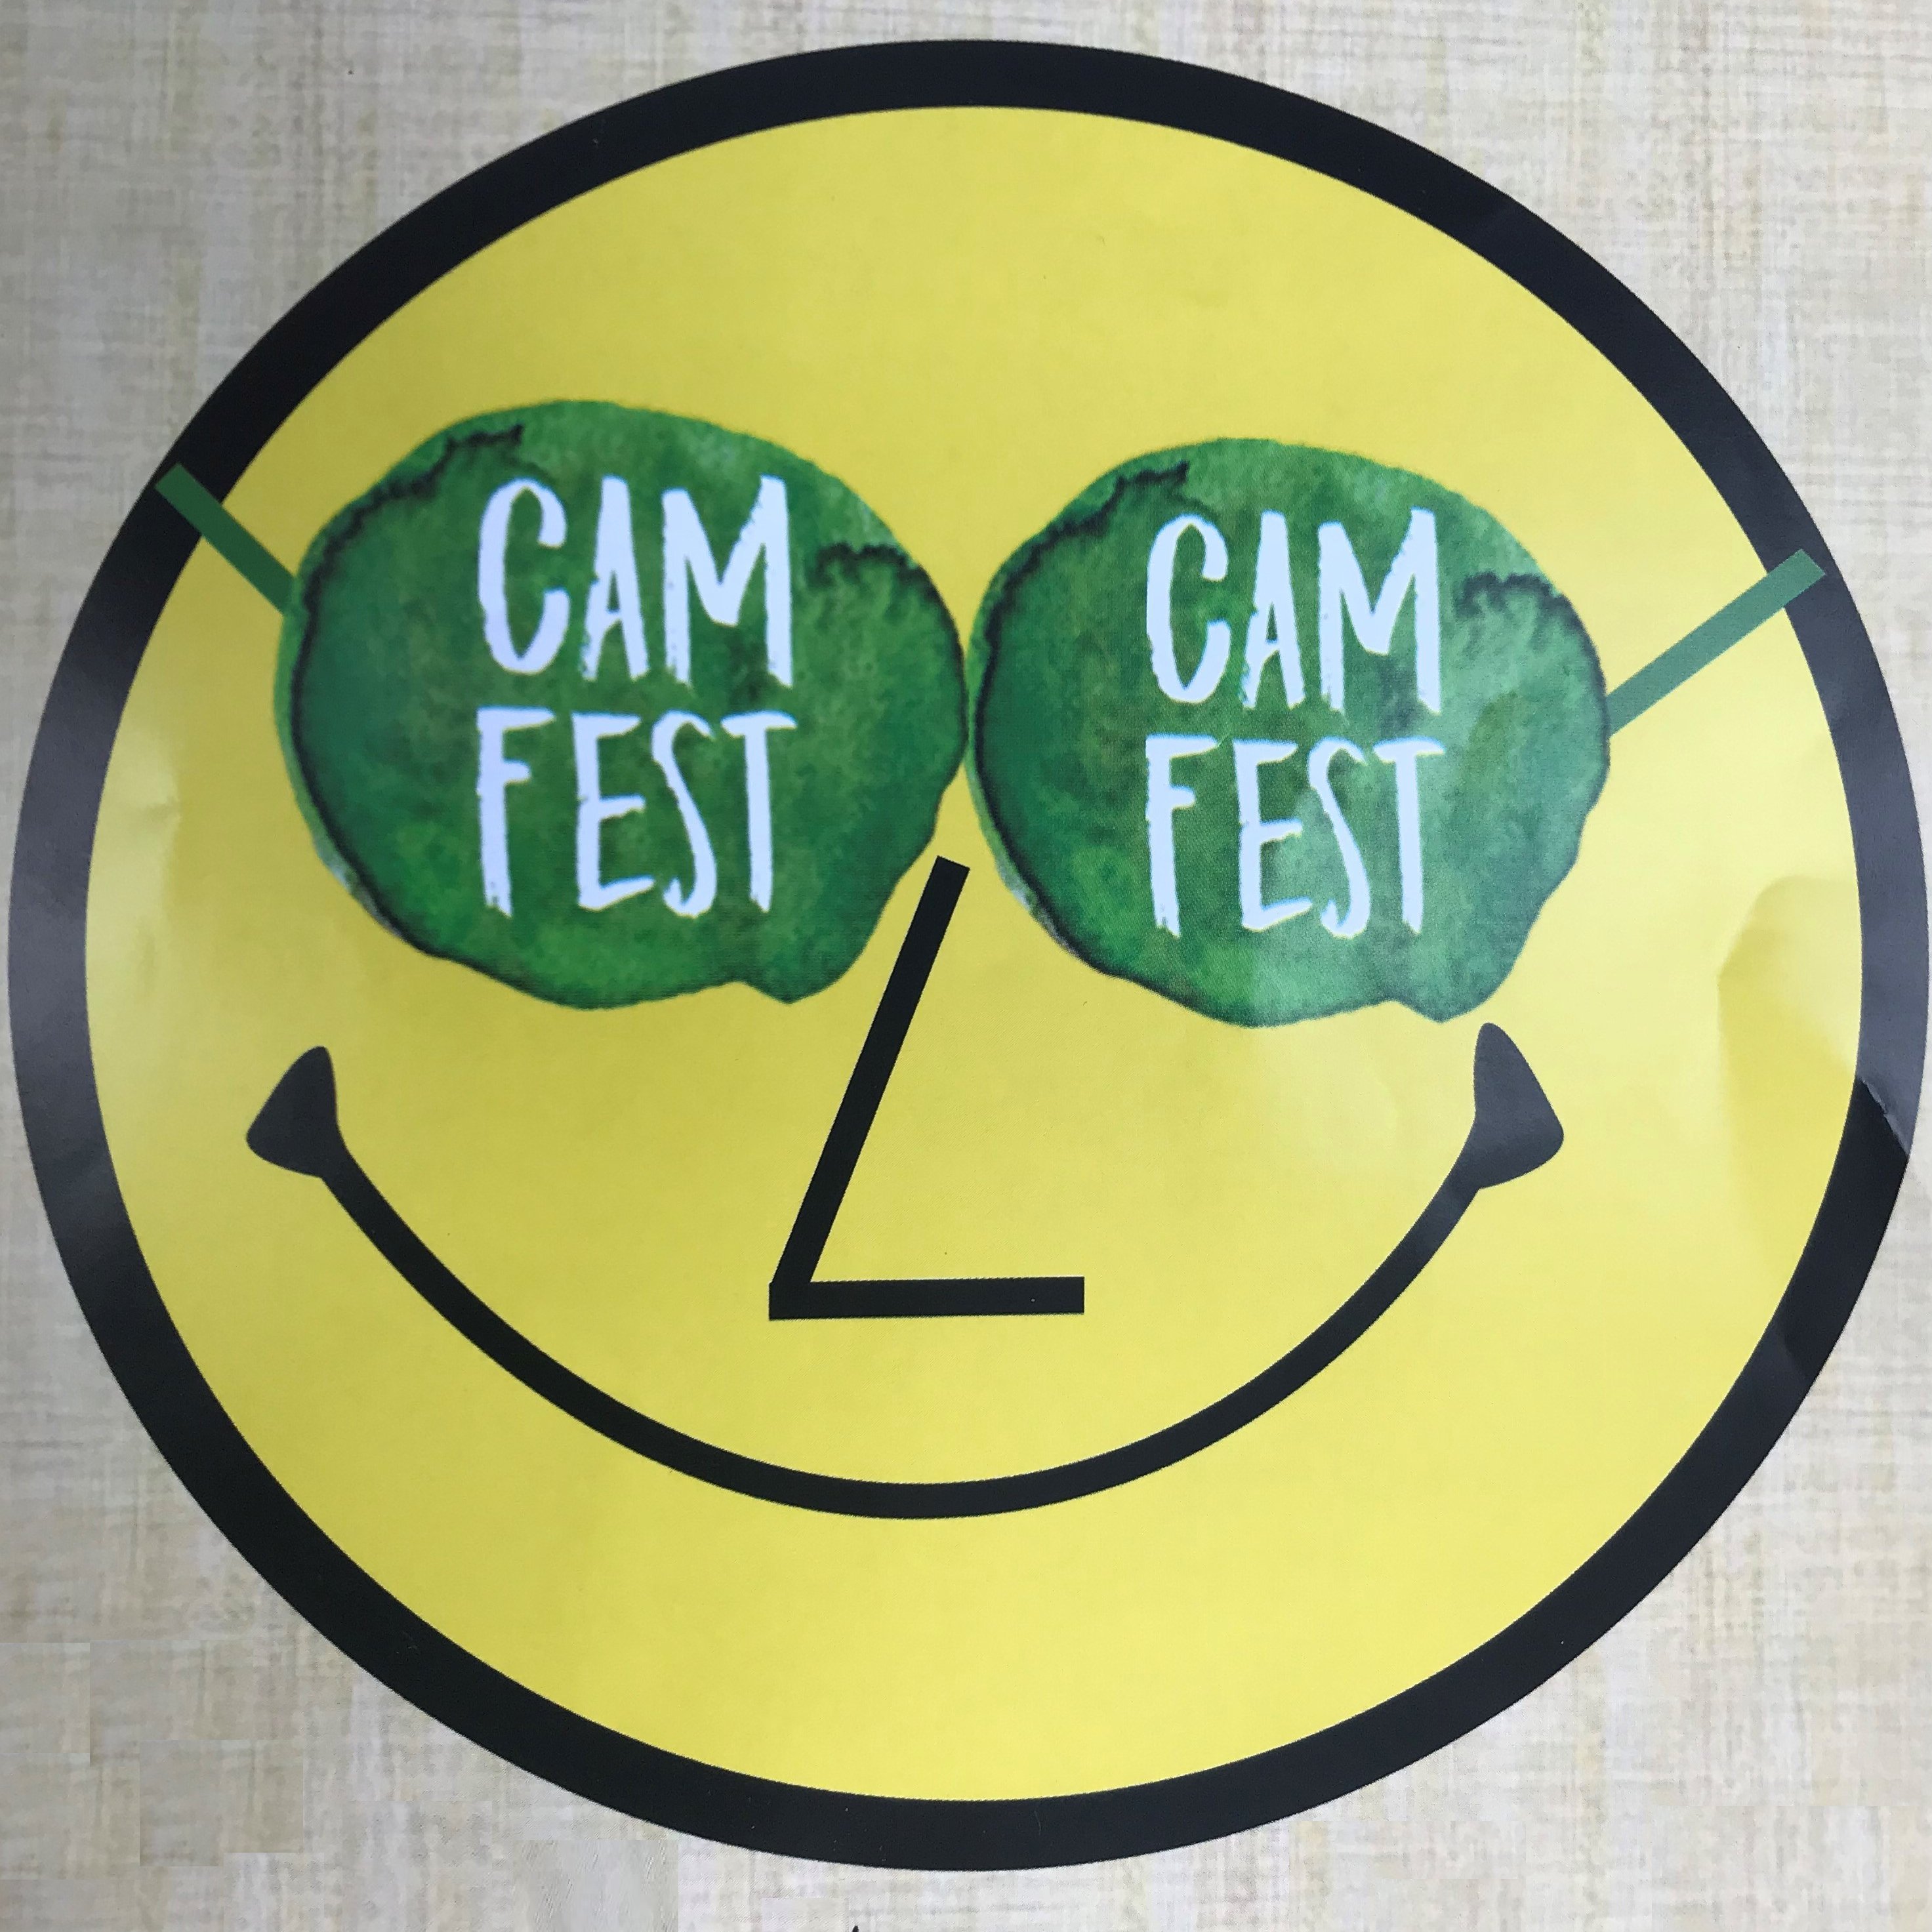 CAMFEST is a registered charity based in #Camberley with year-round community events and #CAMFEST2019 a 3-day visual & performing arts festival 28th-30th June